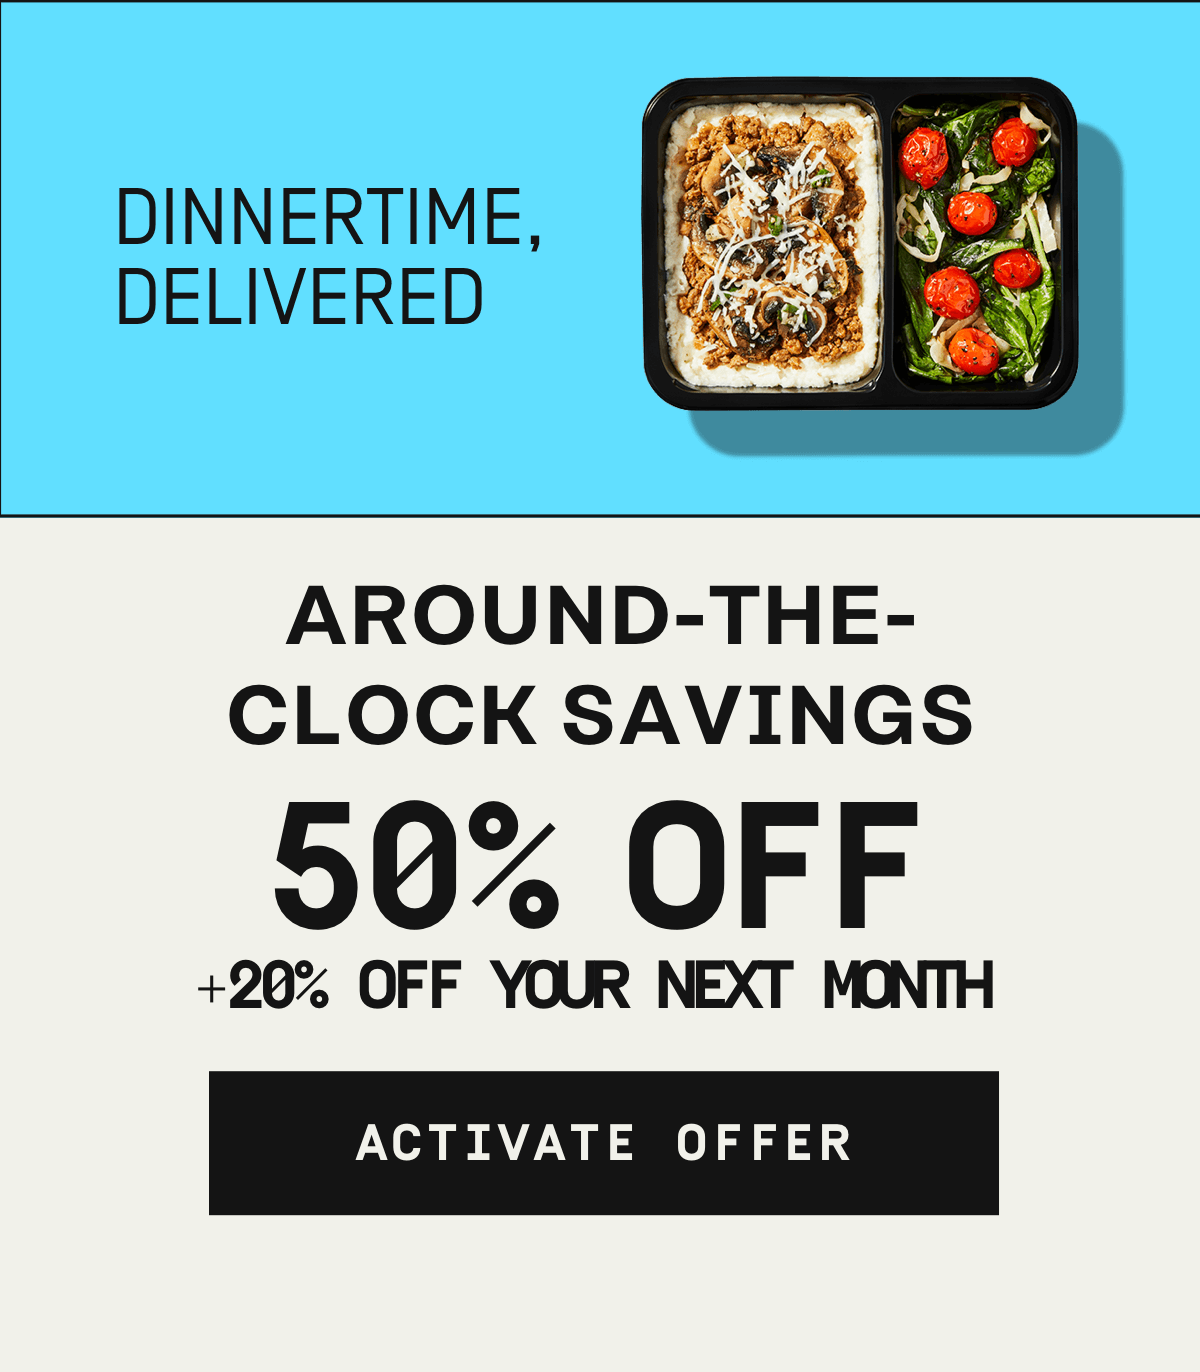 Dinnertime, delivered. Around-the-clock savings 50% OFF + 20% off your next month | Activate Offer